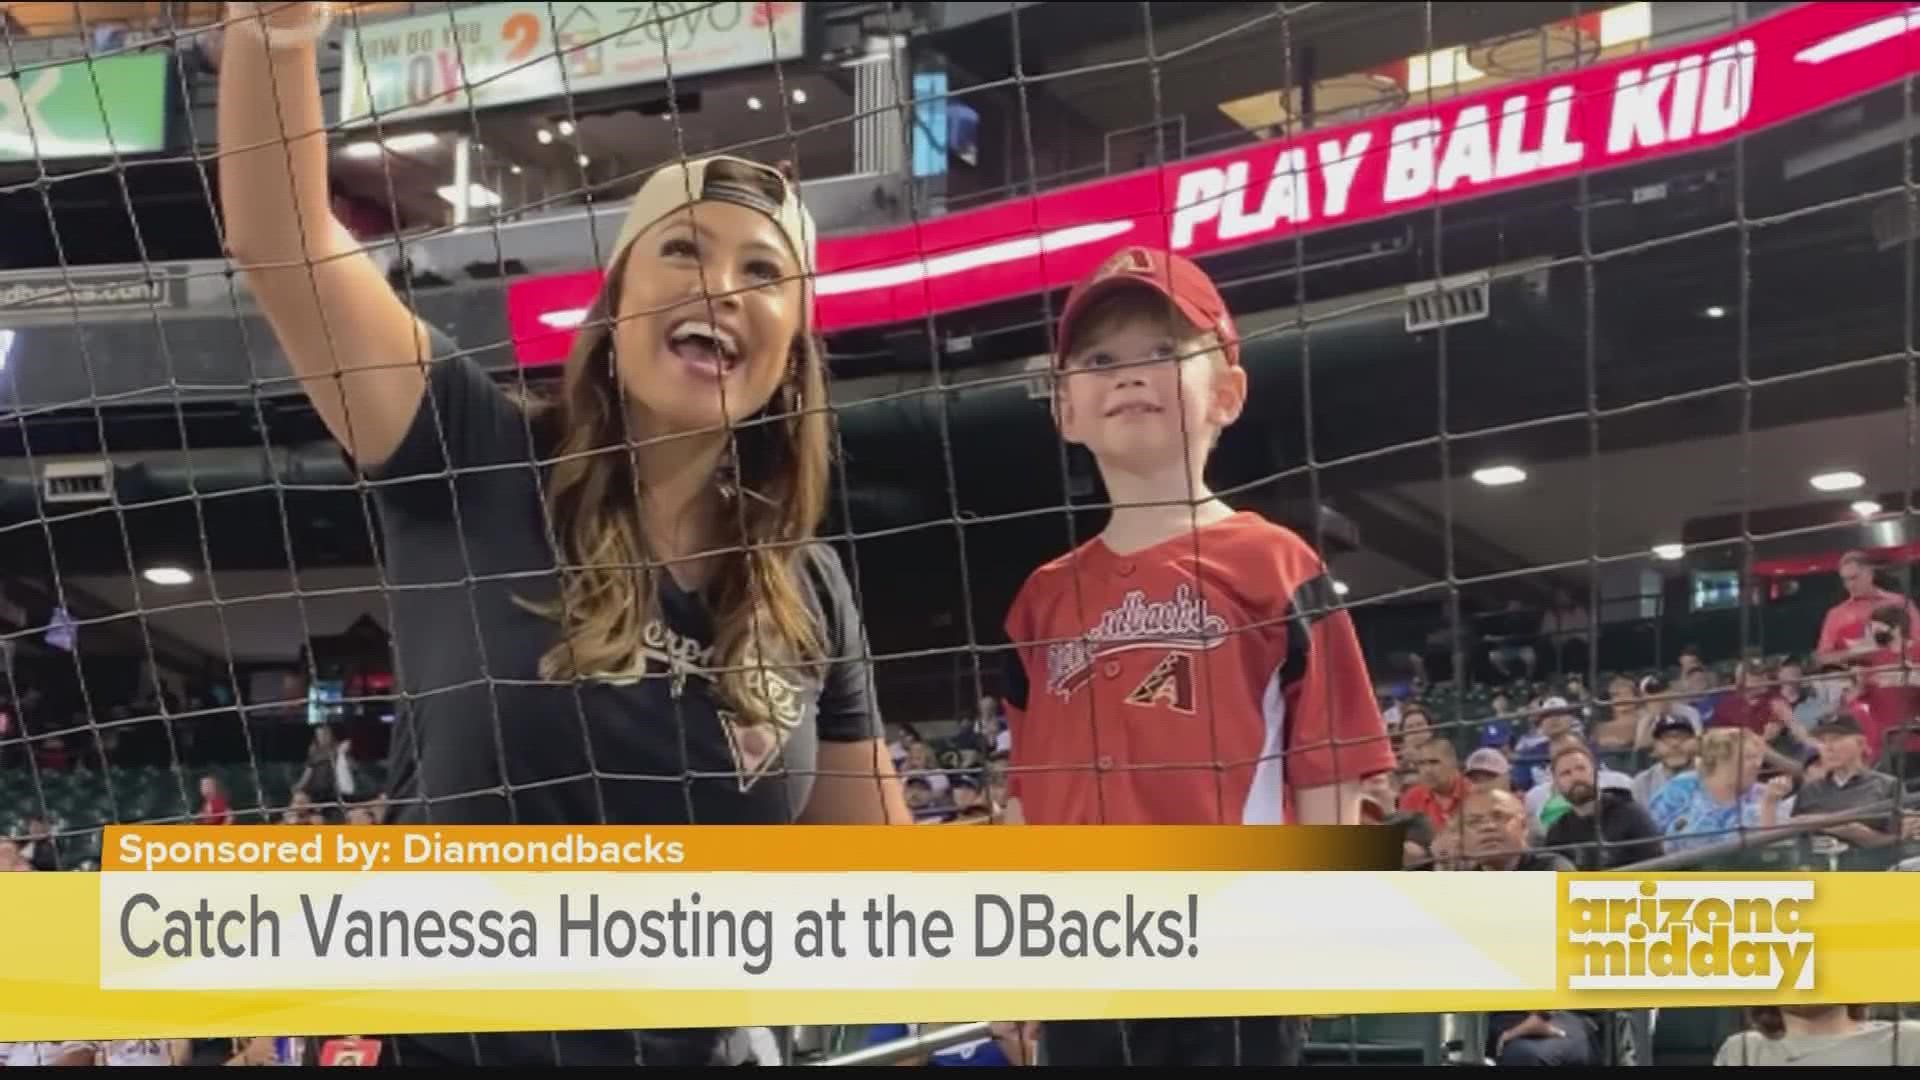 We take a look at the fun Vanessa has as a host at Dback games